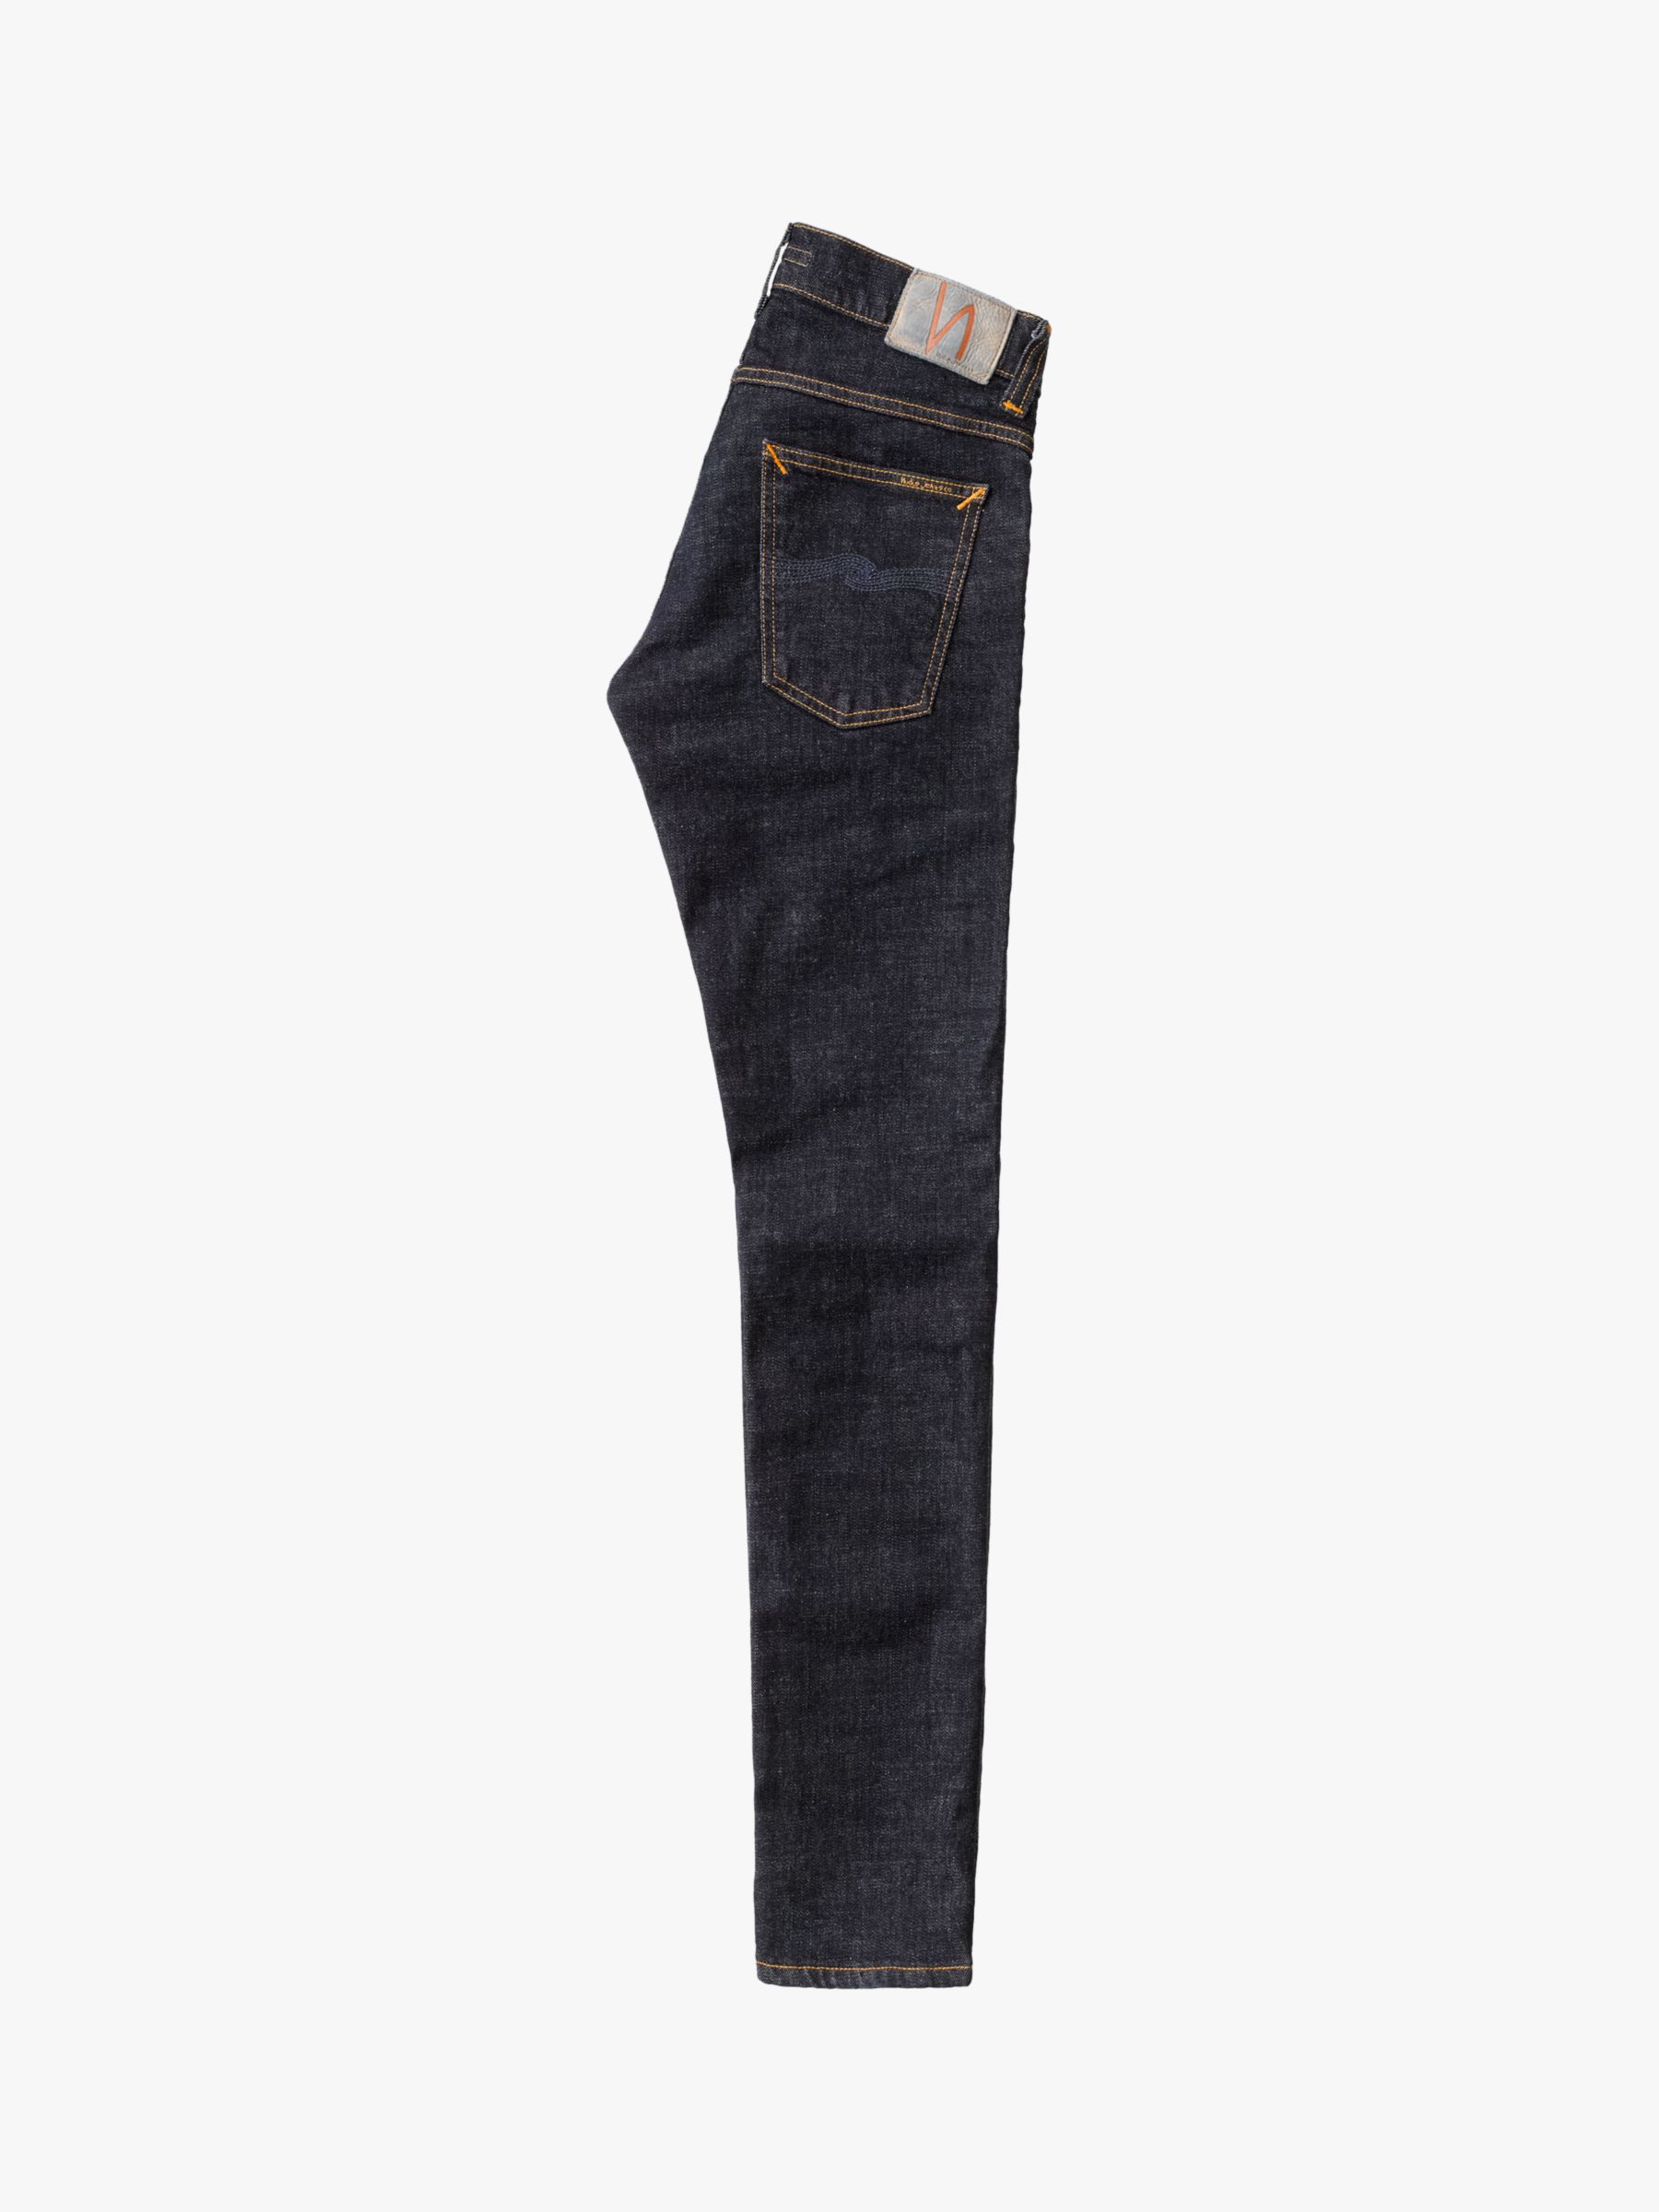 Nudie Jeans Slim Tight Terry Jeans, Rinse Twill at John Lewis & Partners